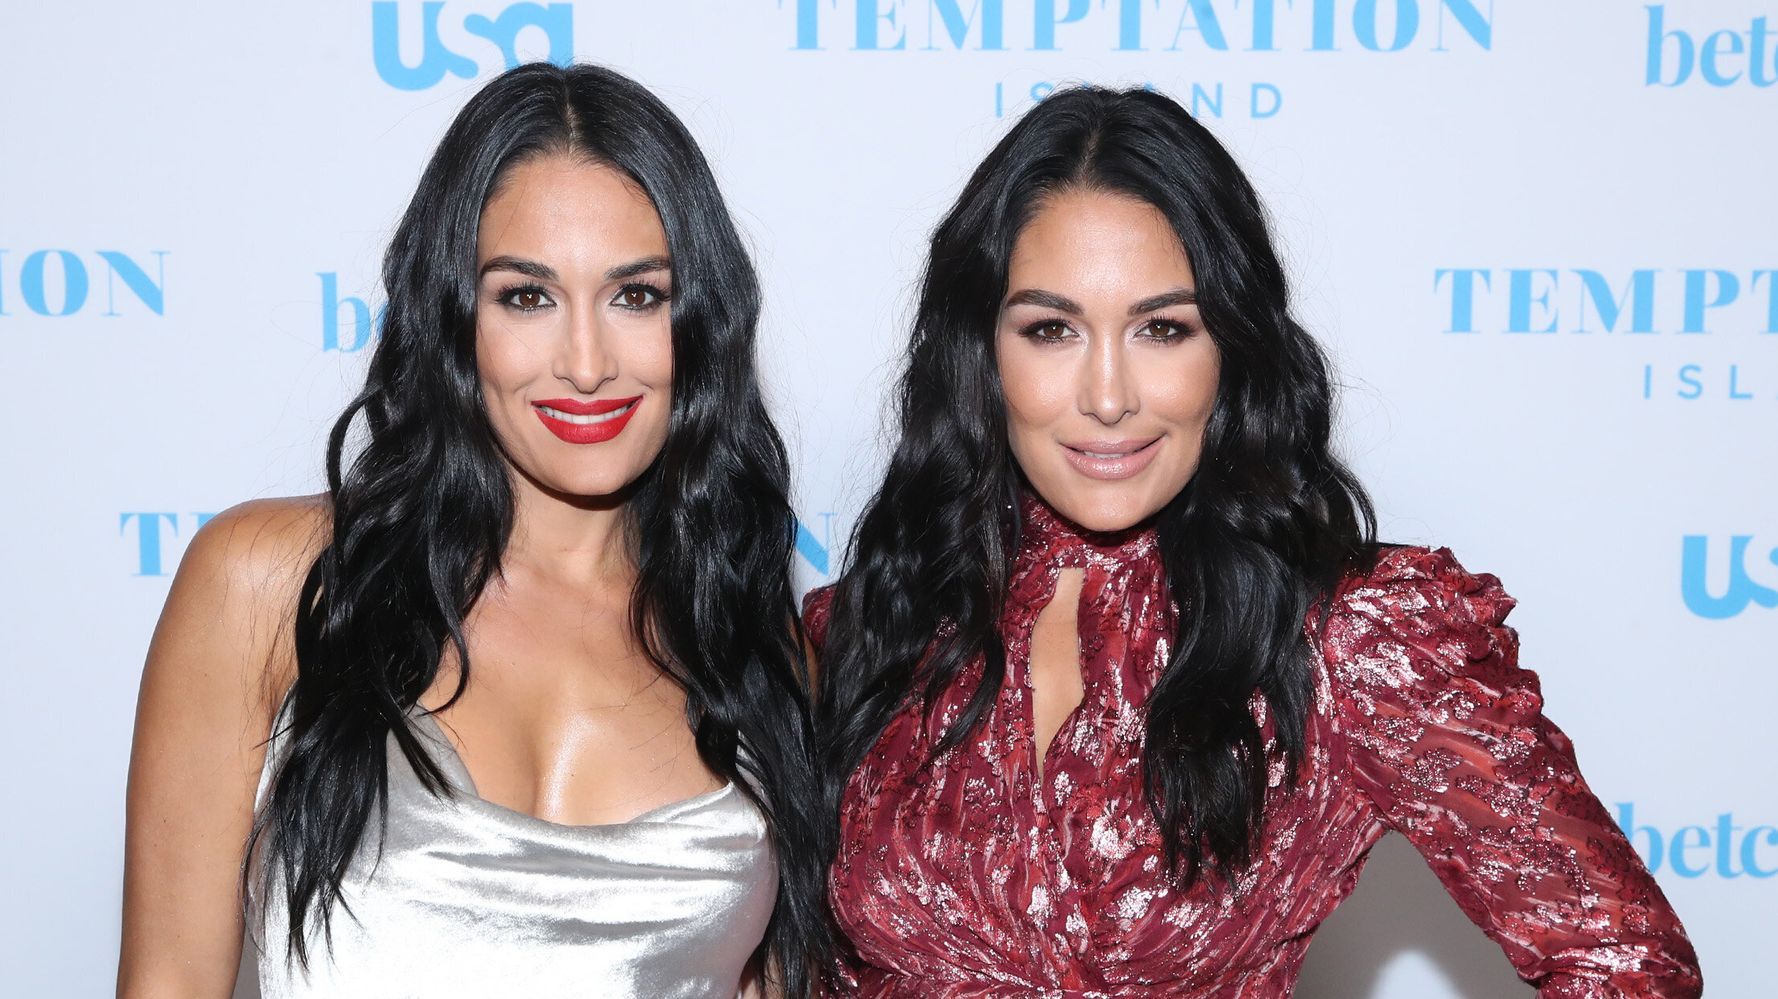 HuffPost on Flipboard: Nikki Bella, Brie Bella Reveal Their Baby Boys' Names  To The World